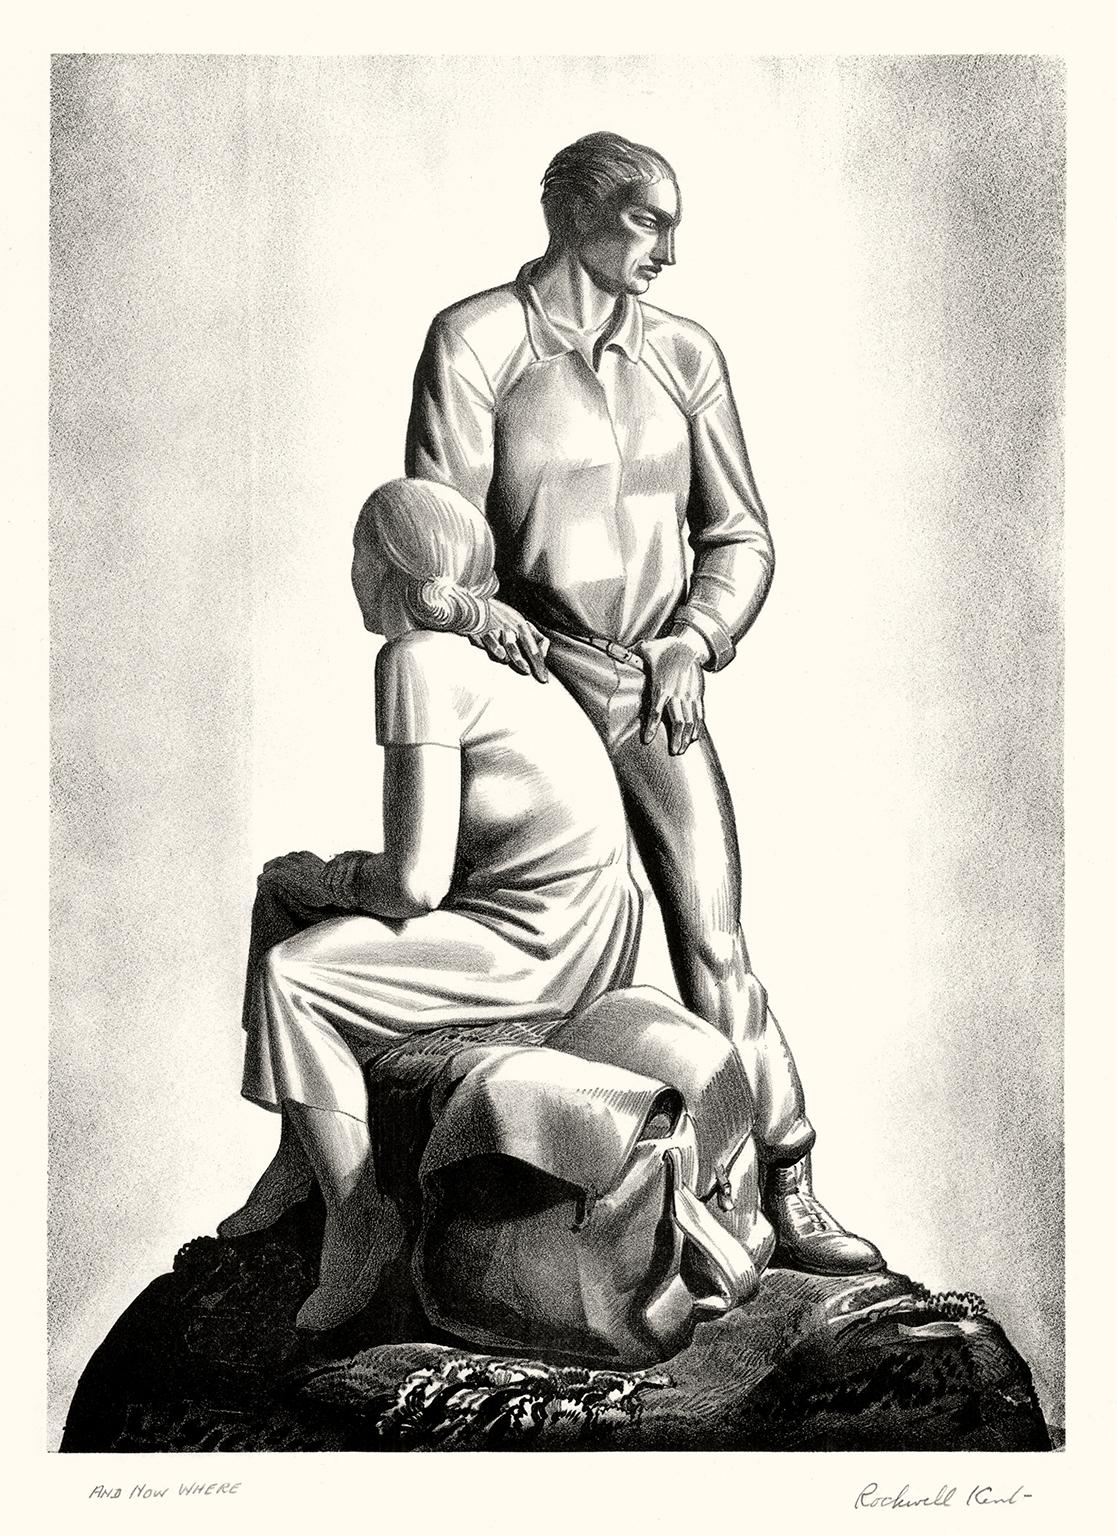 Rockwell Kent Figurative Print - And Now Where?